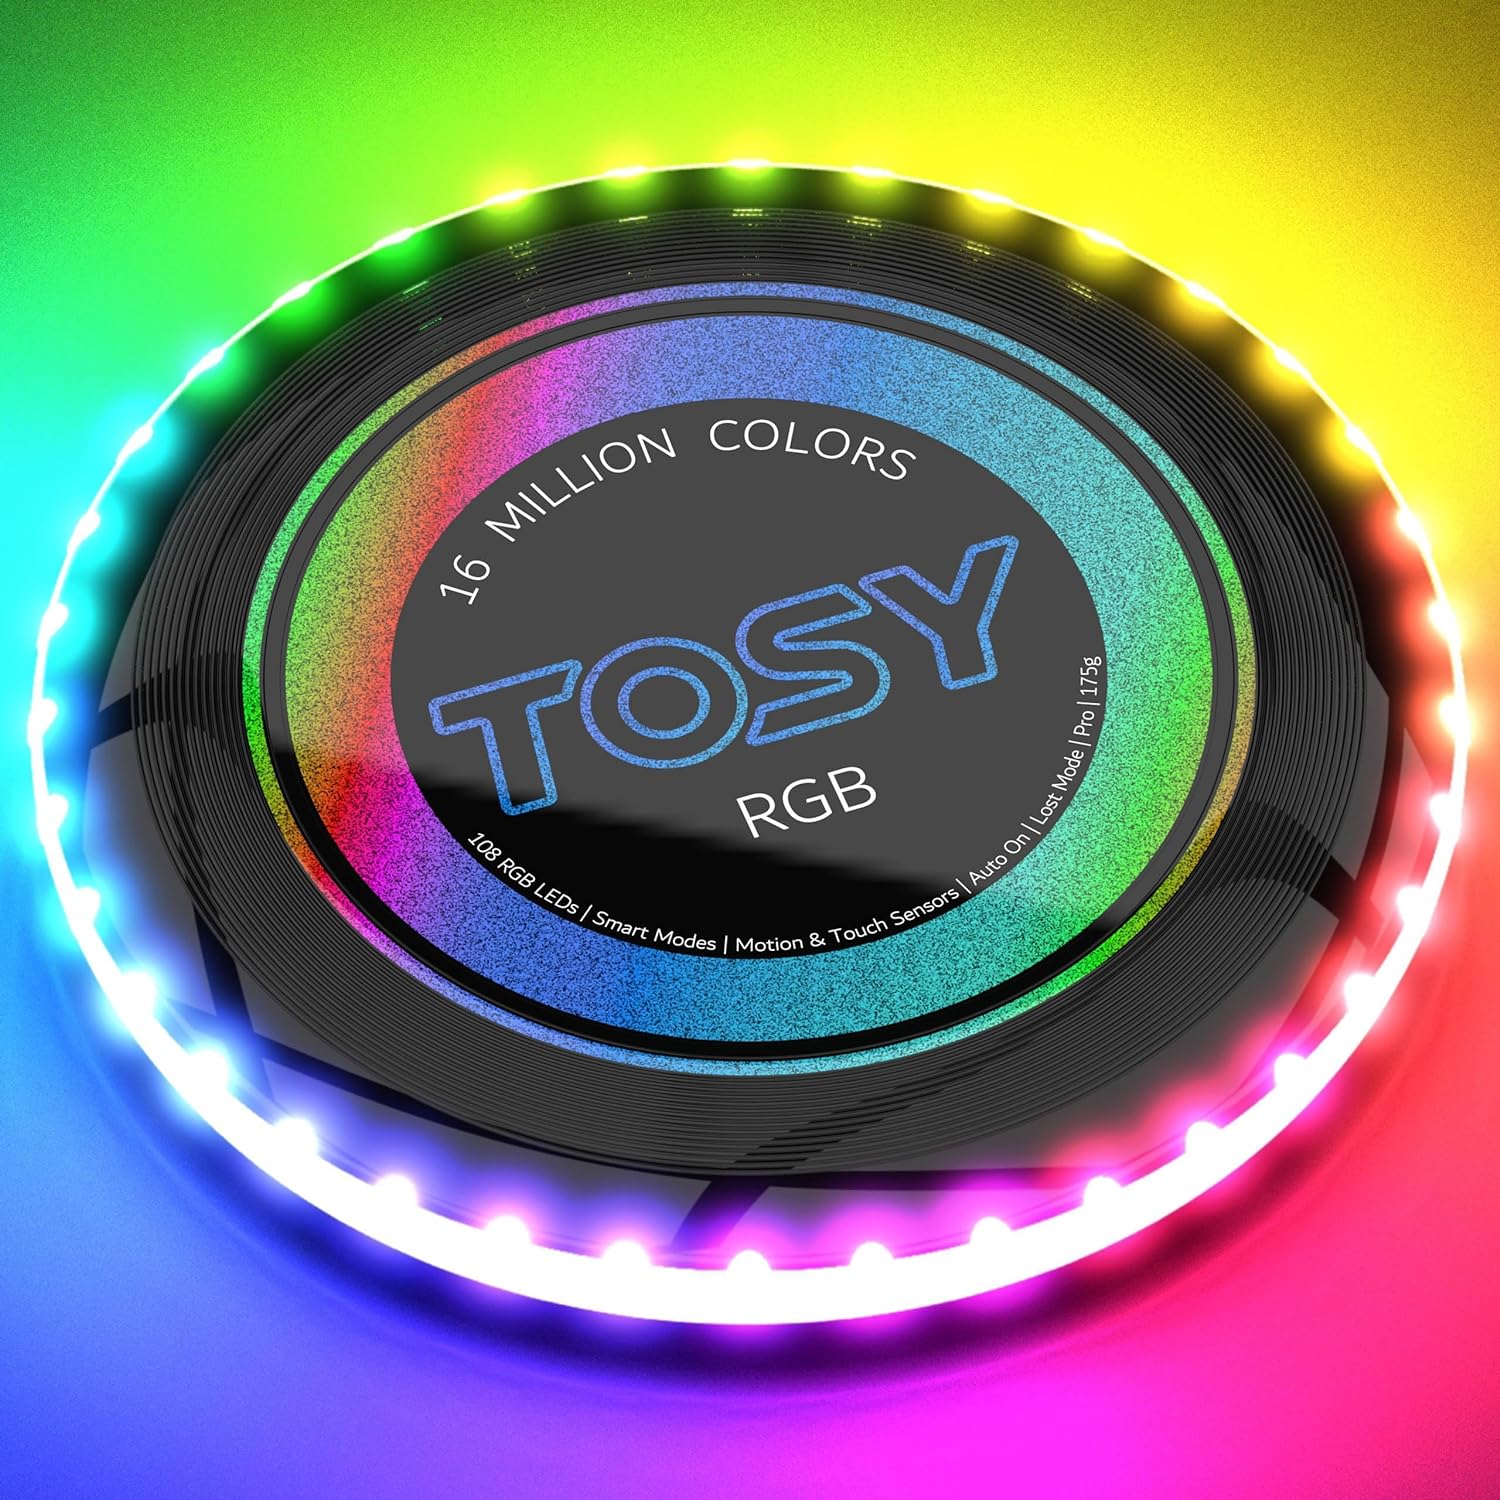 Flying Disc - 16 Million Color RGB or 36 or 360 LEDs, Extremely Bright, Smart Modes, Auto Light Up, Rechargeable, Birthday Gift, Easter Basket Stuffers